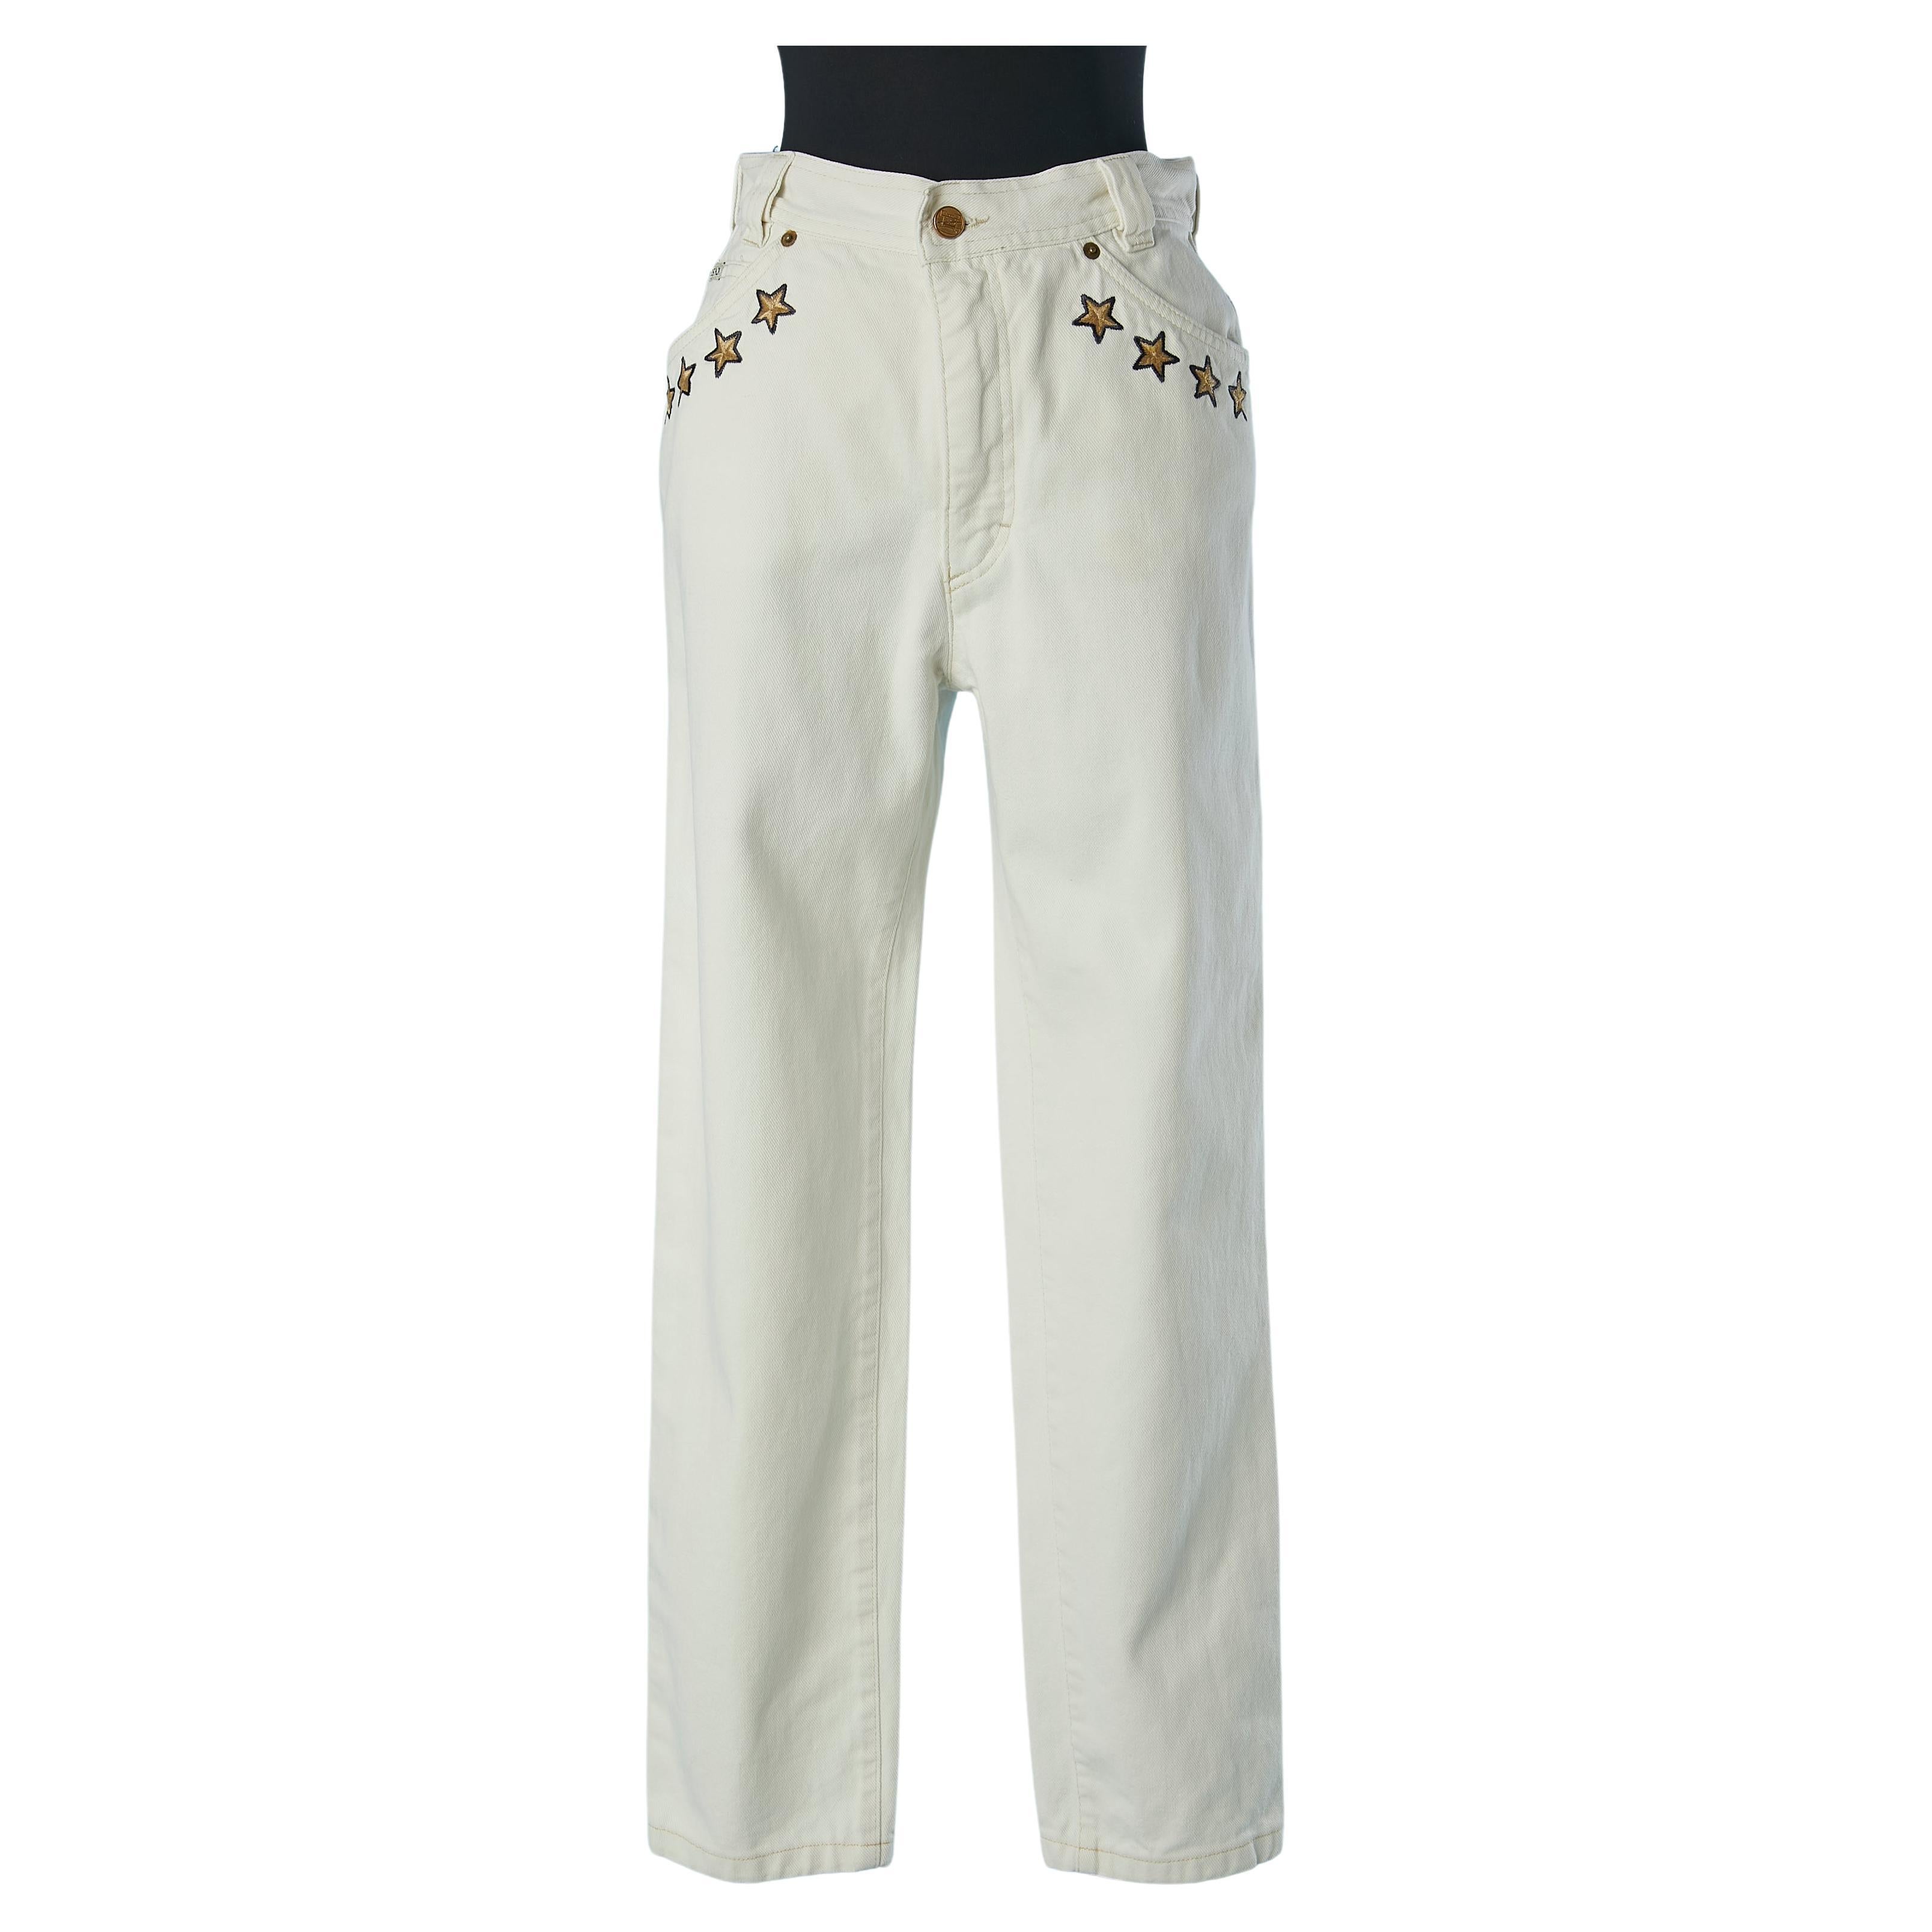 Off-white denim jean with stars and anchor threads embroideries Escada  For Sale